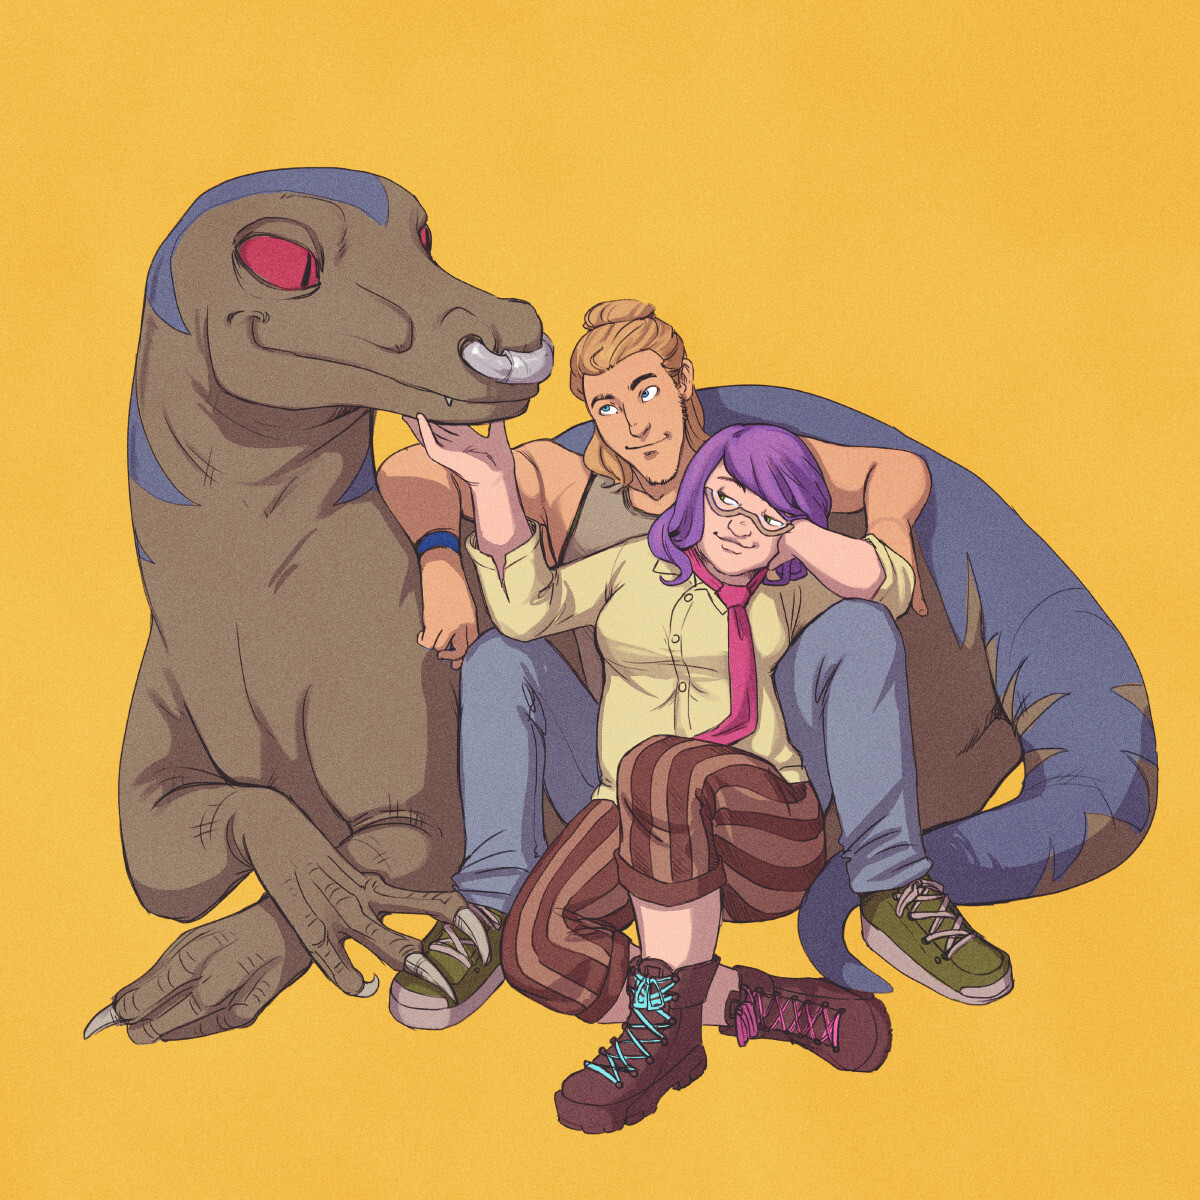 Gert, Chase, and Old Lace from marvel's Runaways. 